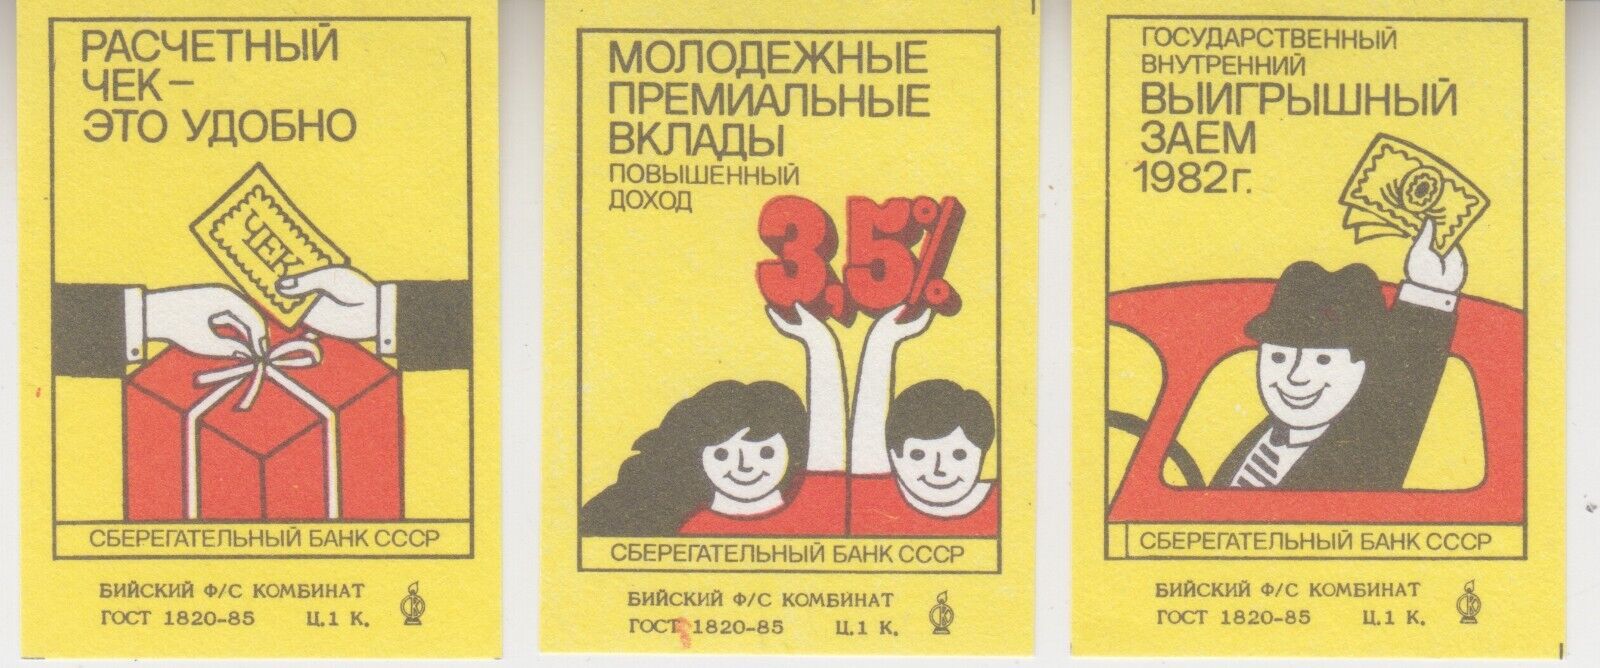 USSR Saving Bank. Deposits and Payments Options. Premium loan 1982.